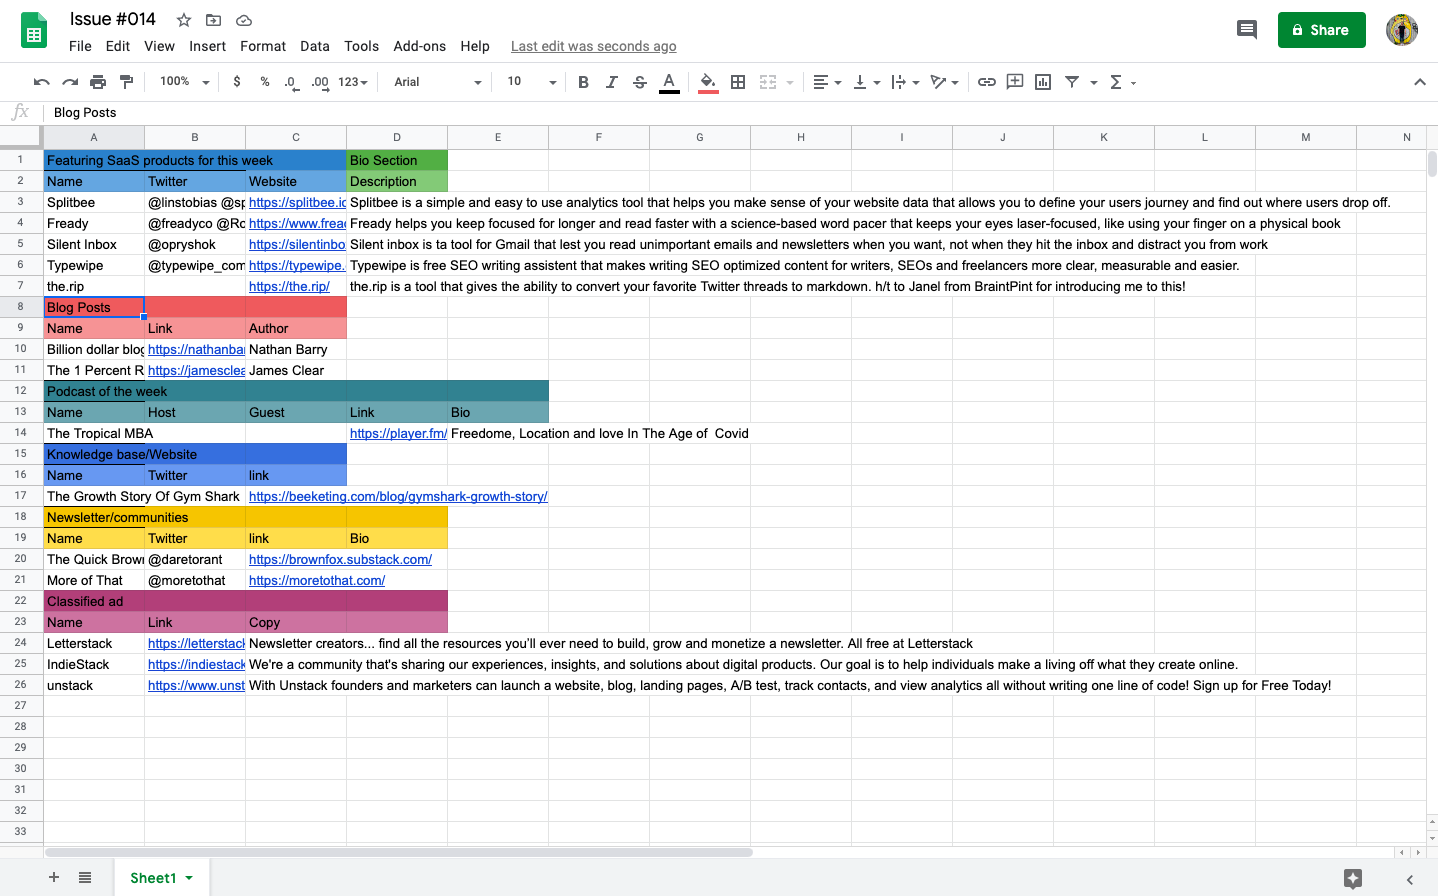 Example of a Google Sheet Nic uses to organise content for issues of The Slice